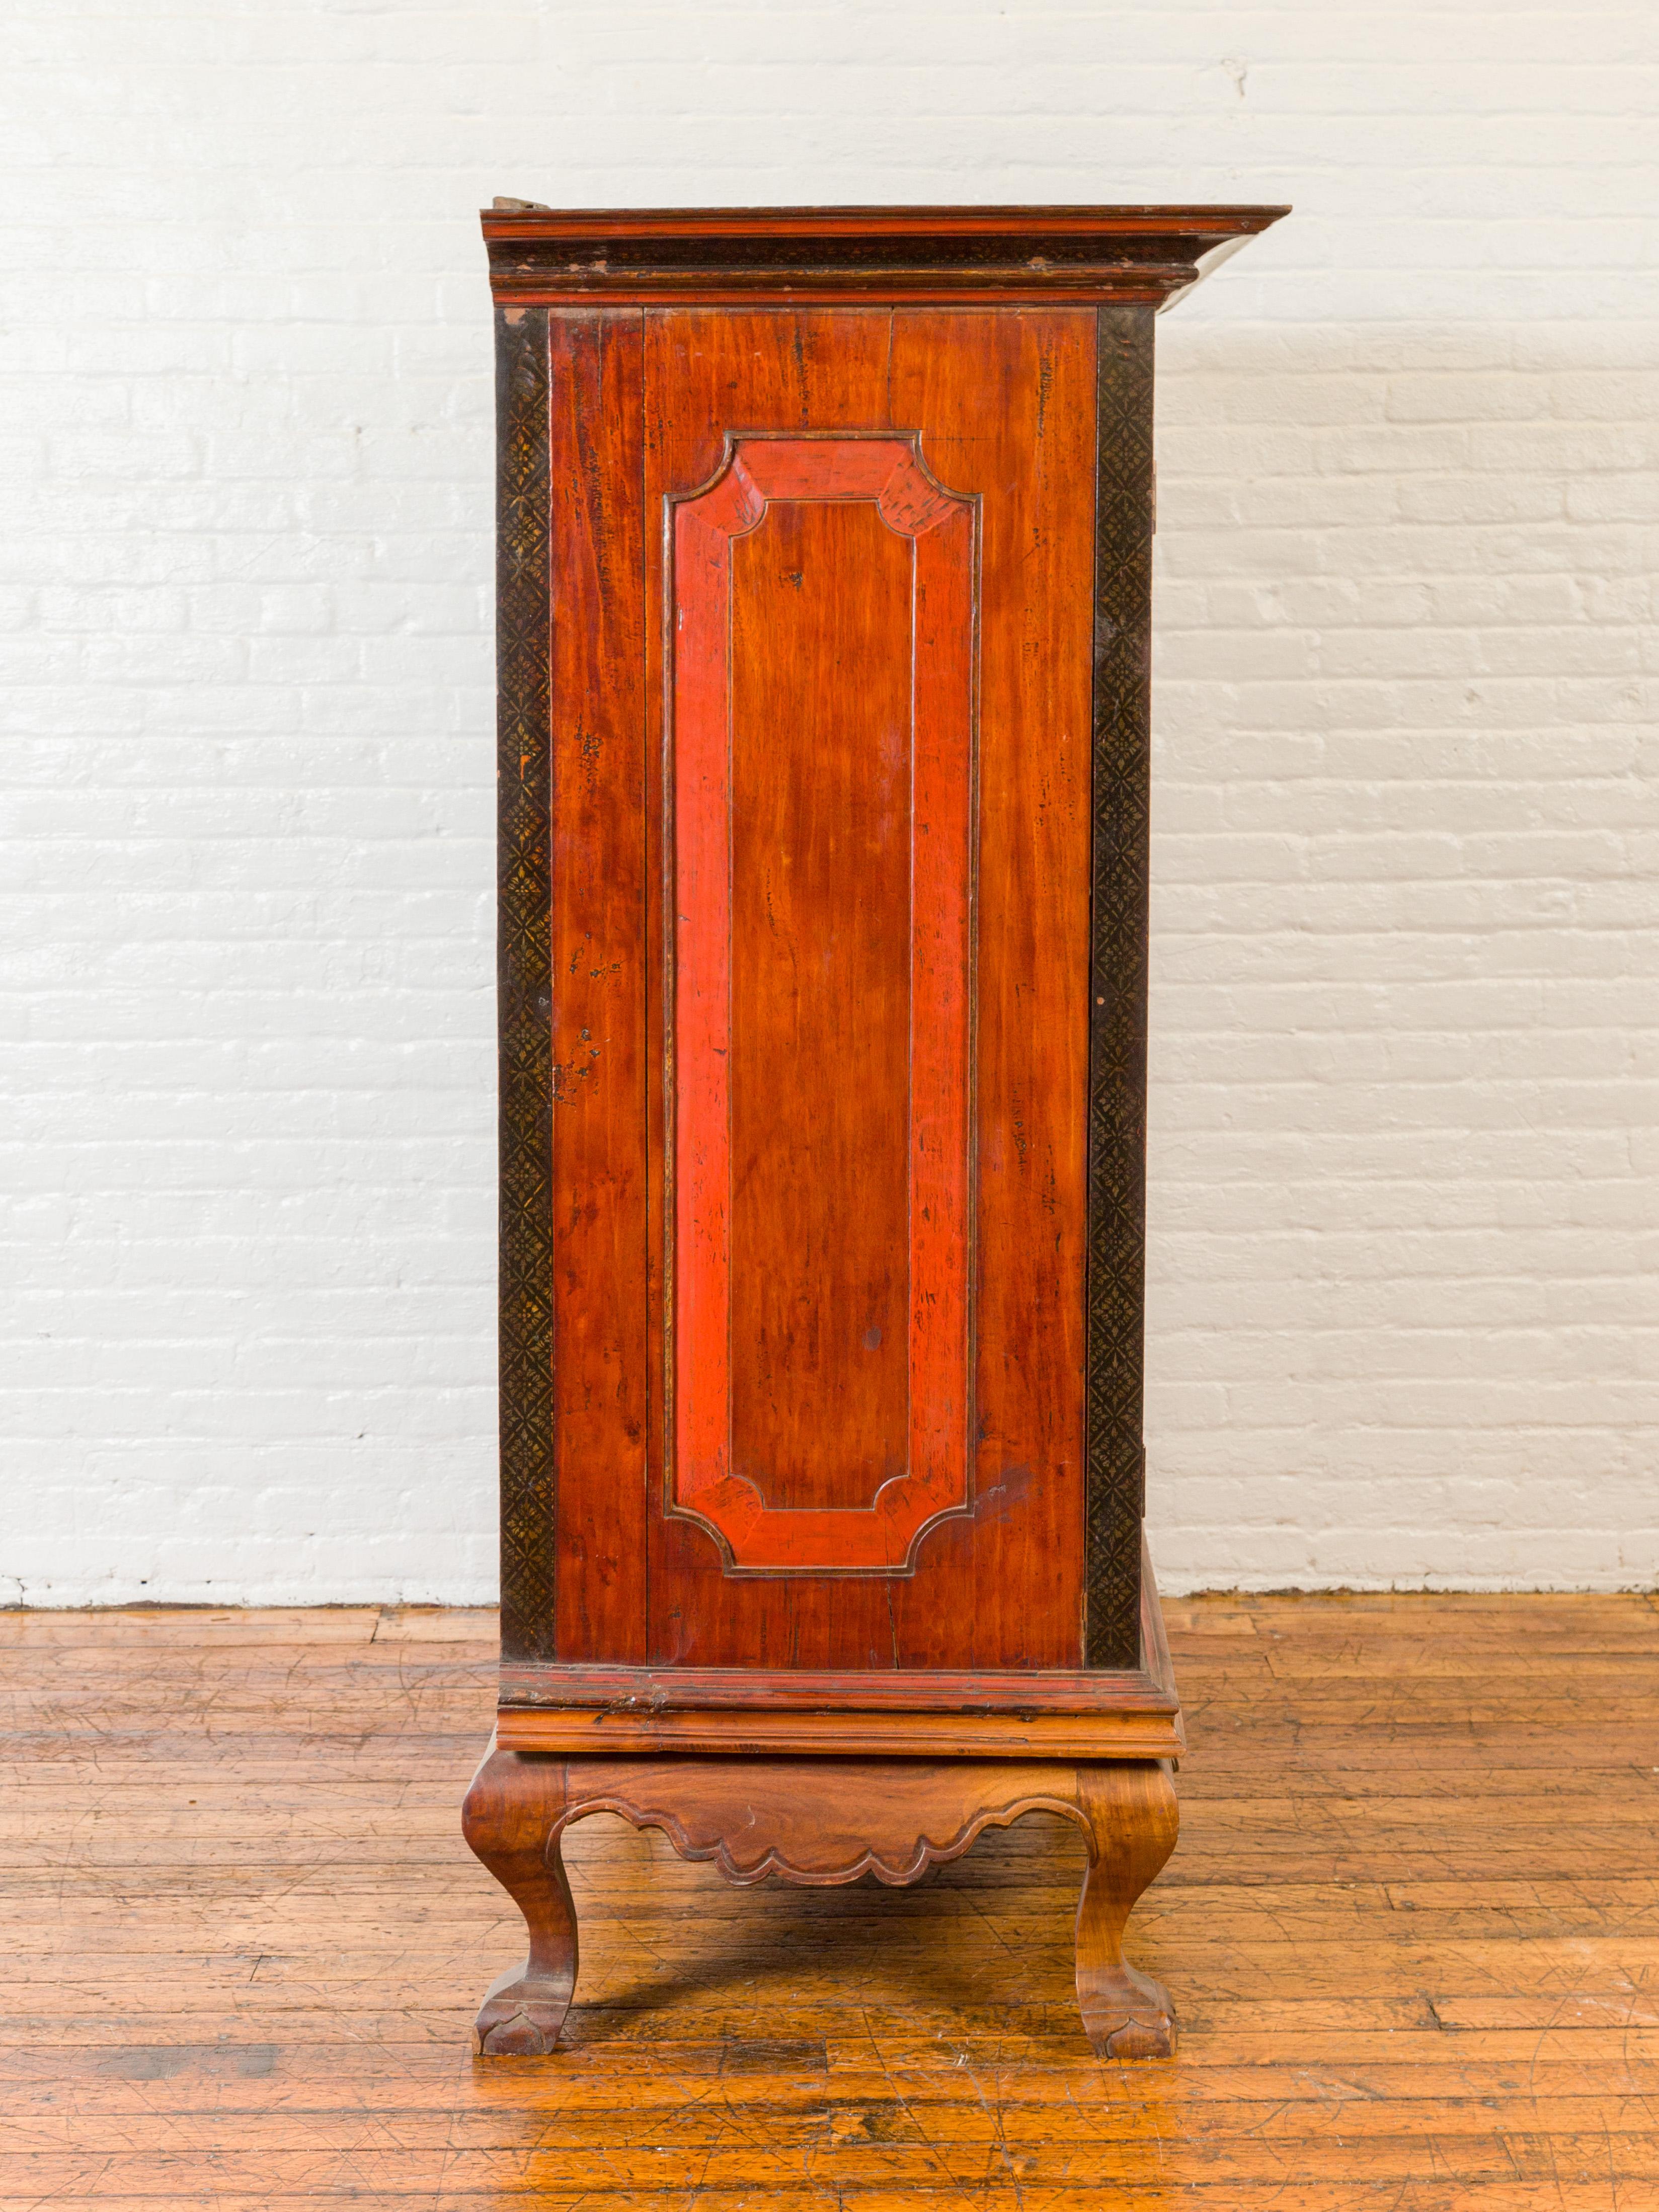 Dutch Colonial Antique Lacquered Wood Cabinet with Glass Doors and Cabriole Legs In Good Condition For Sale In Yonkers, NY